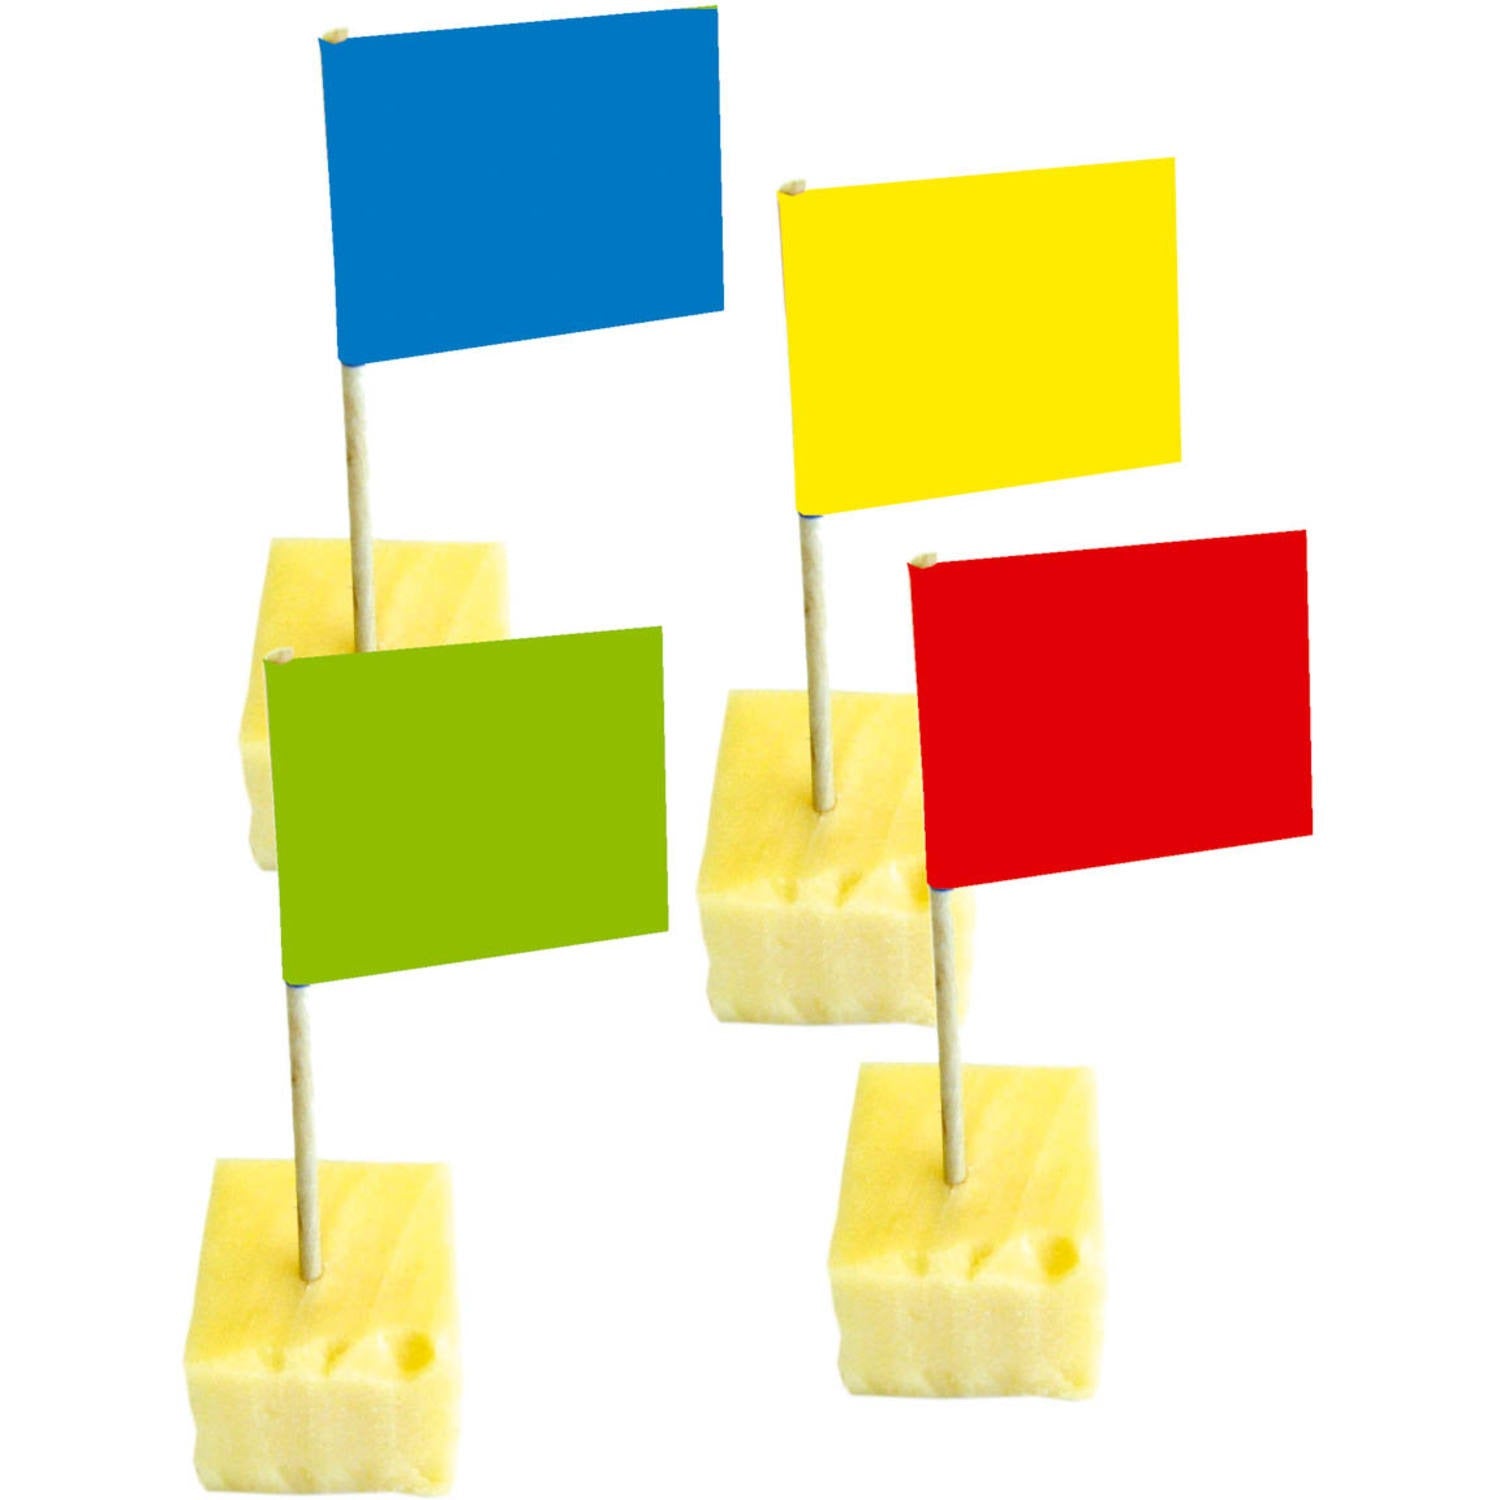 Wooden sticks with colored flags 50 pcs